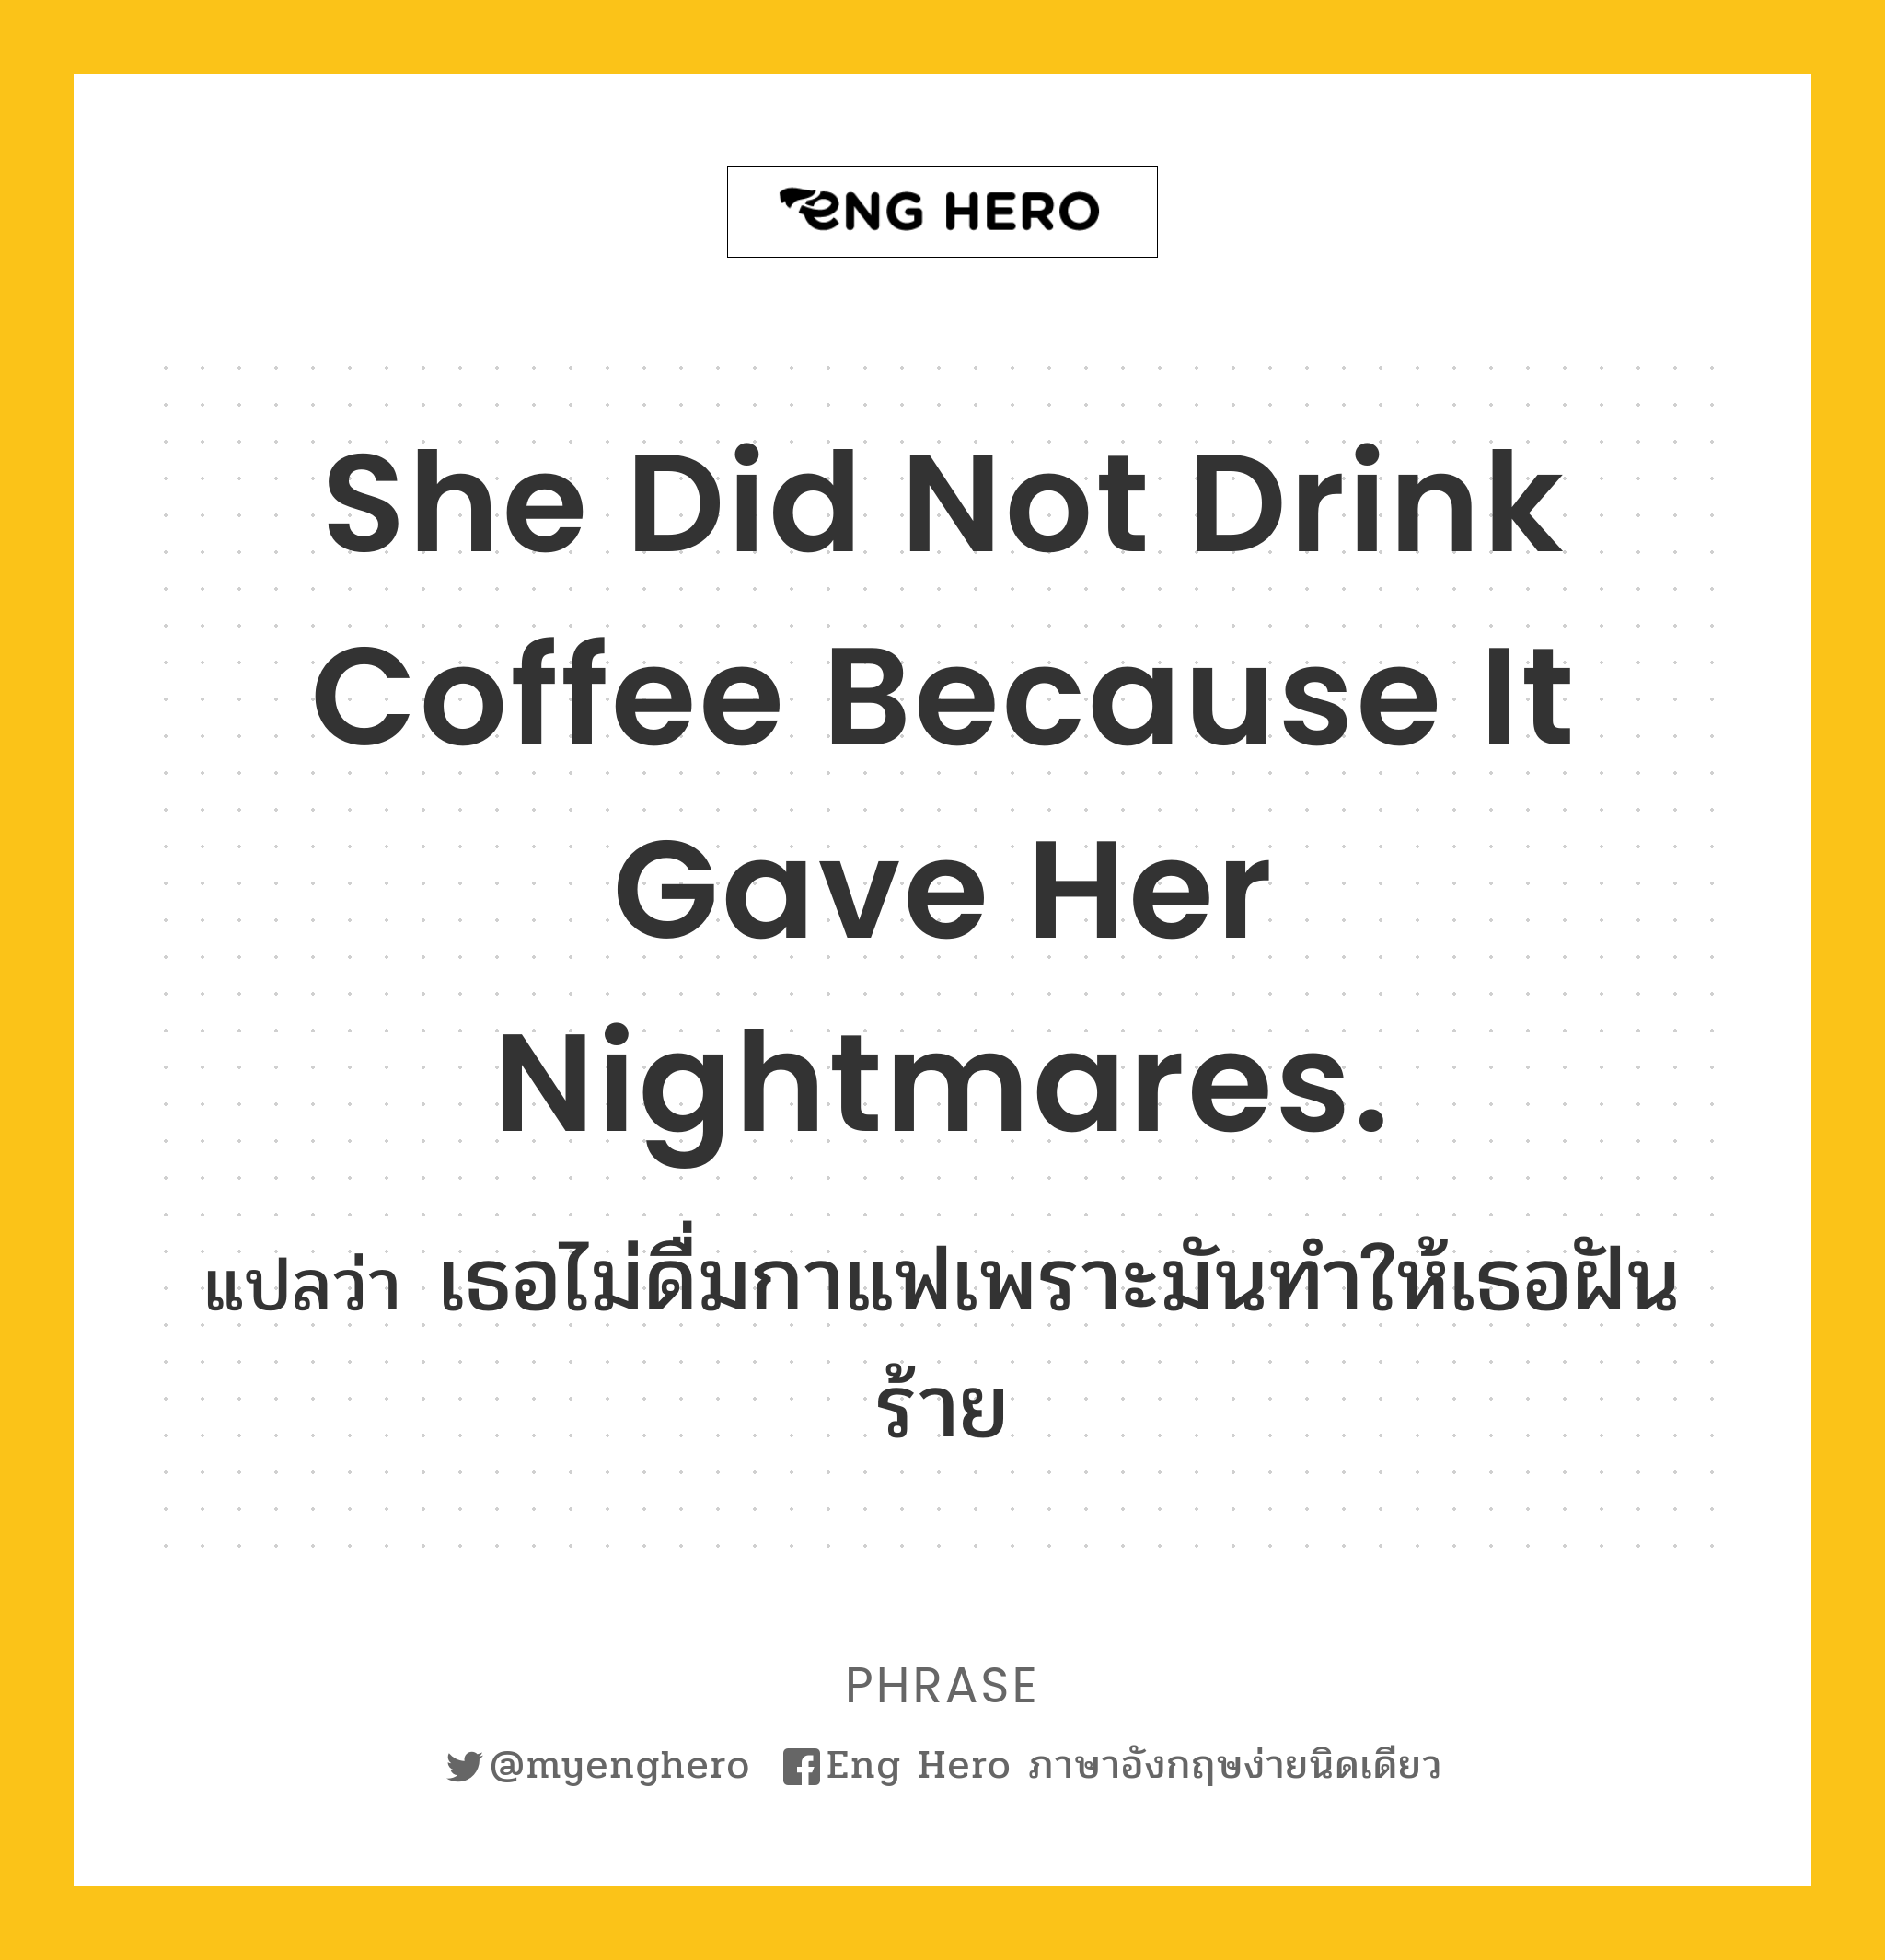 She did not drink coffee because it gave her nightmares.